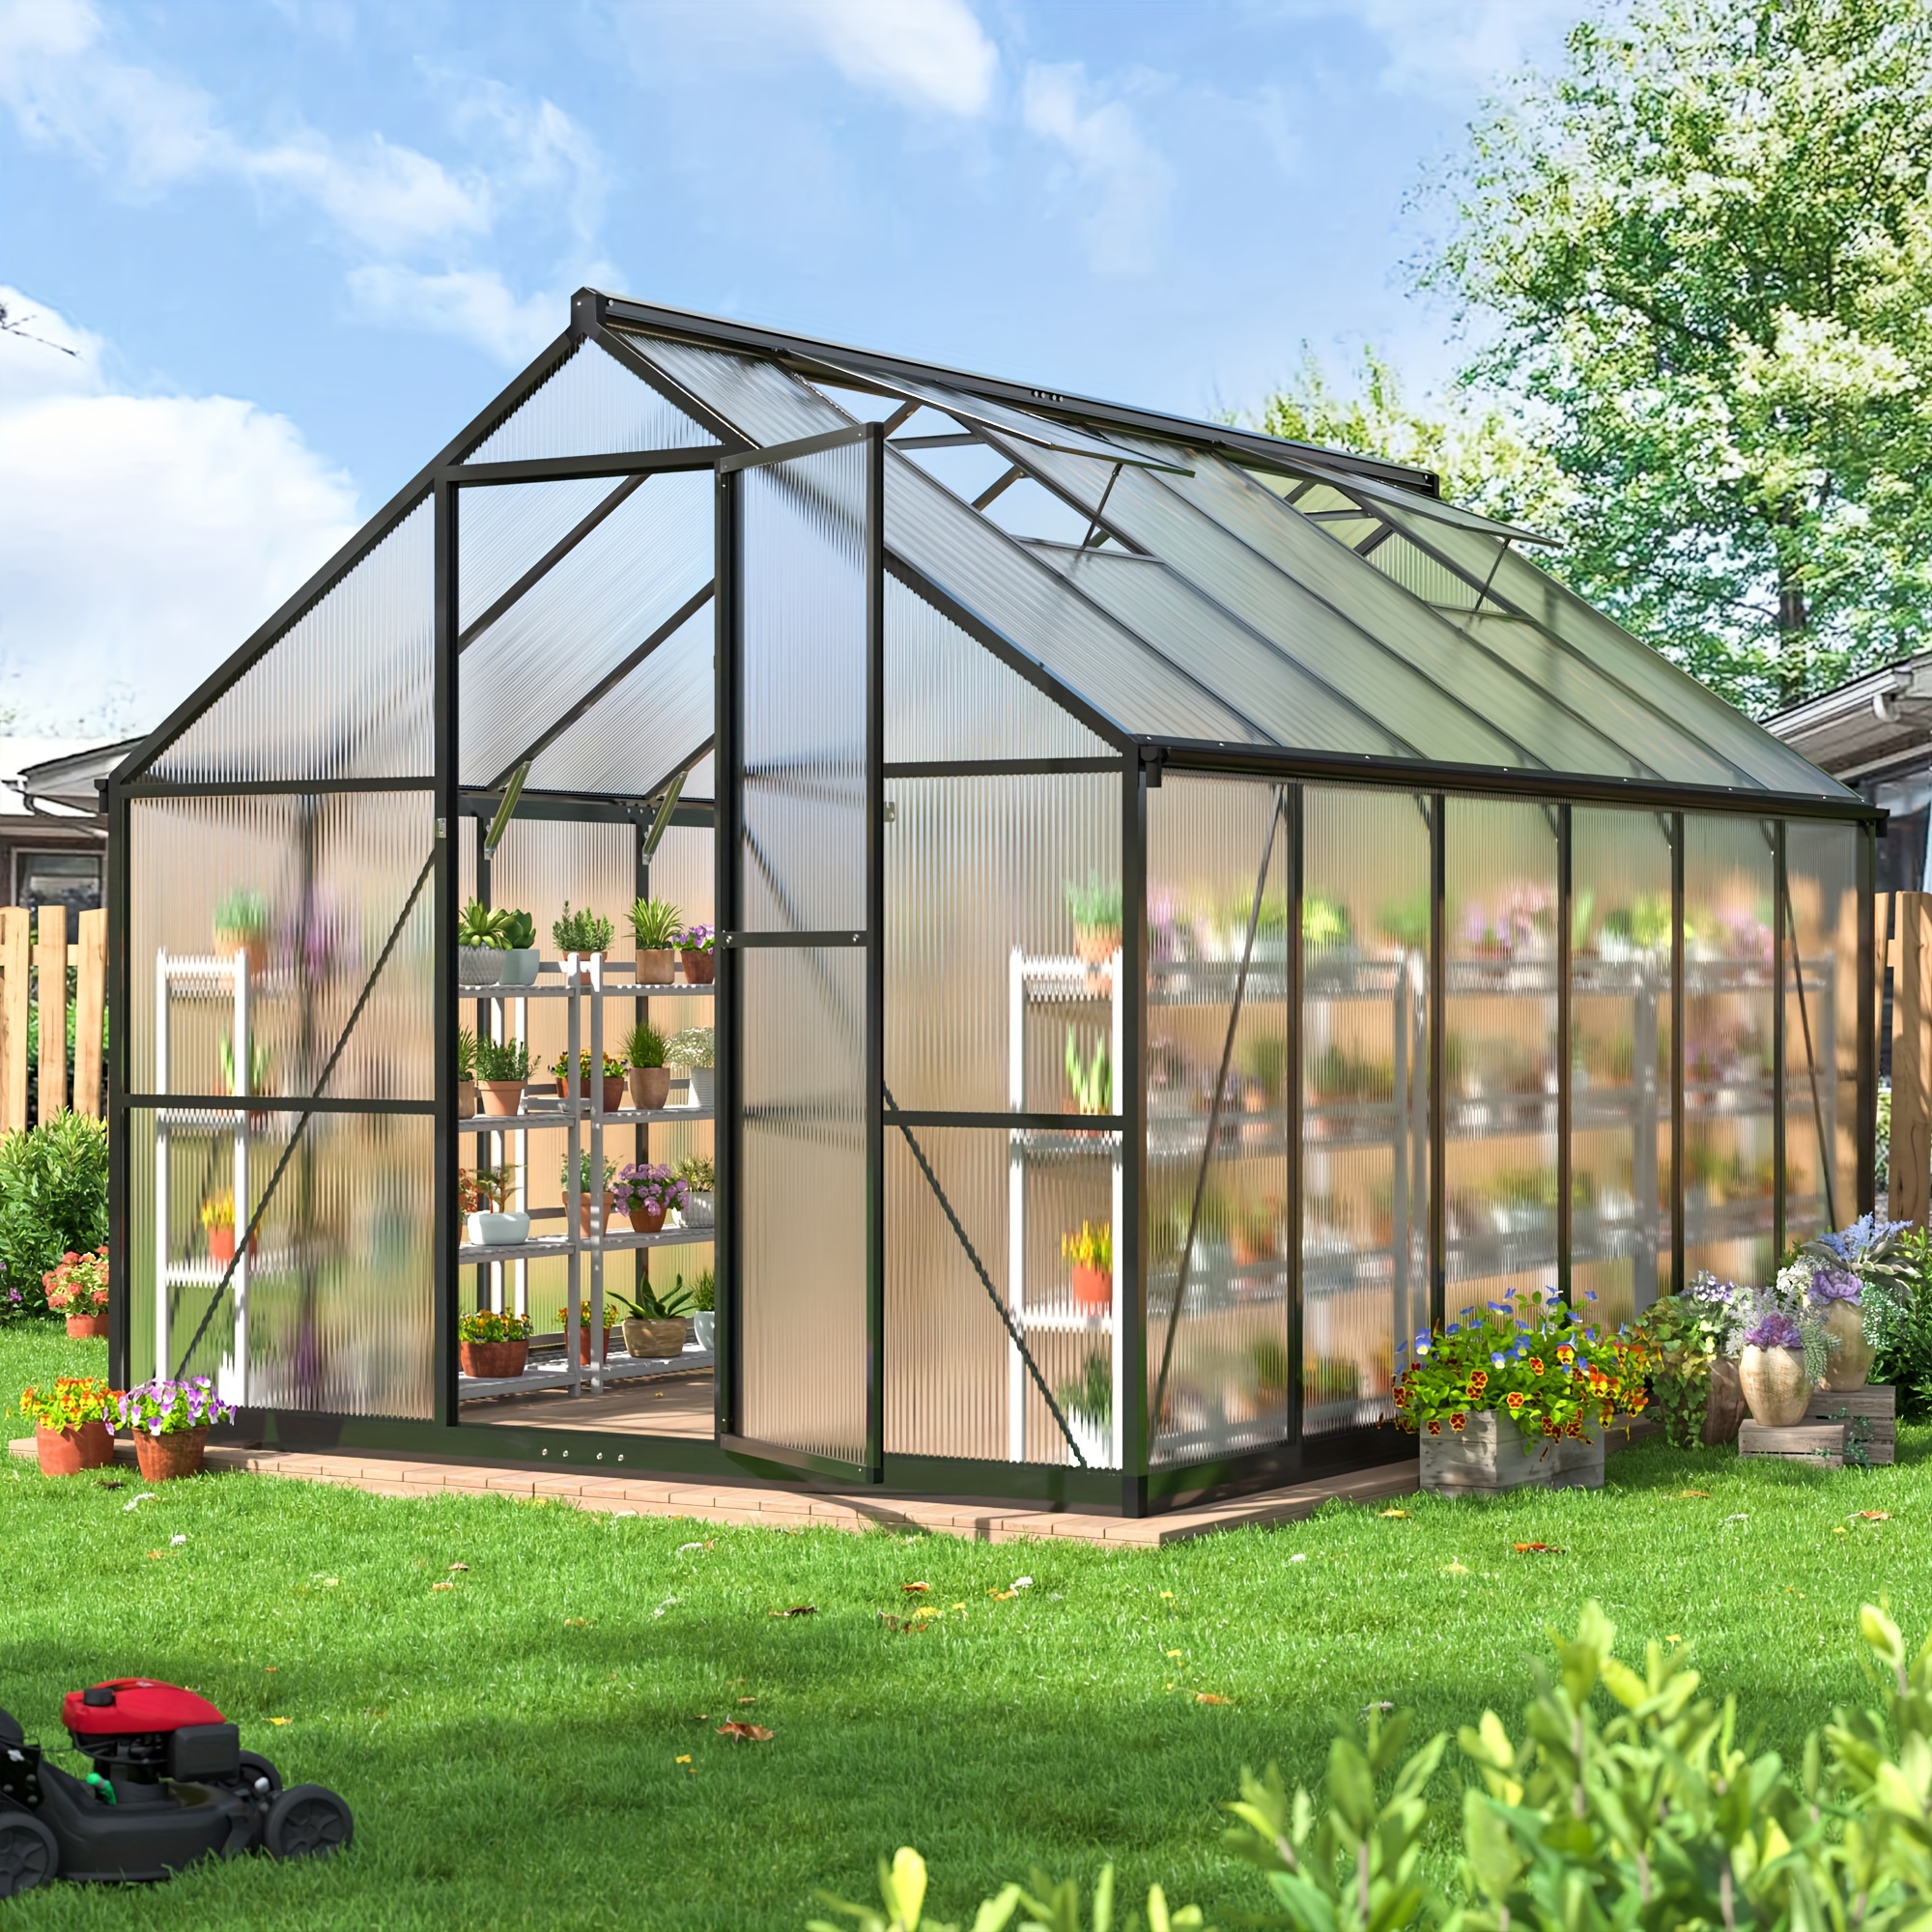 

12x8 Ft Greenhouse For Outdoors, Polycarbonate Greenhouse With Quick Setup Structure And Roof Vent, Aluminum Large Walk-in Greenhouse For Outside Garden Backyard